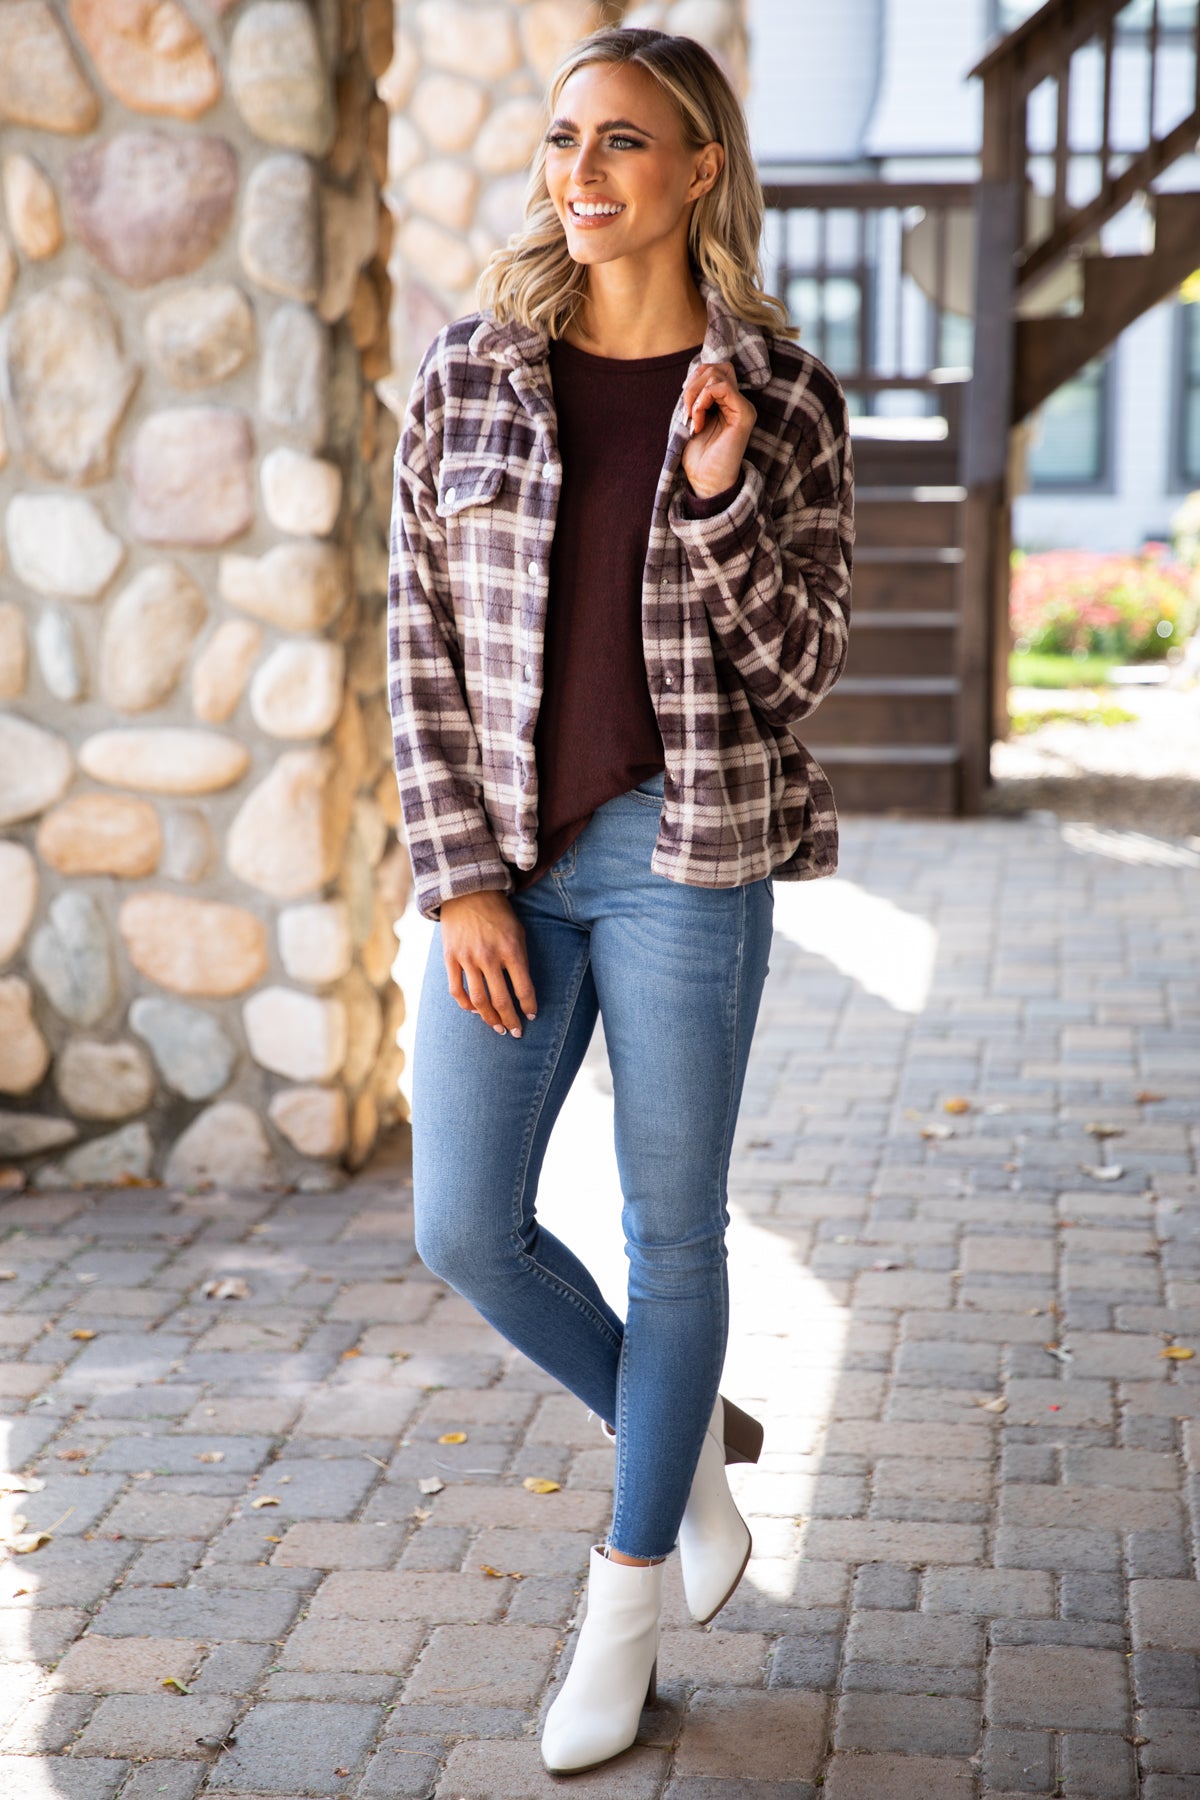 Brown Plaid Fuzzy Plaid Jacket - Filly Flair